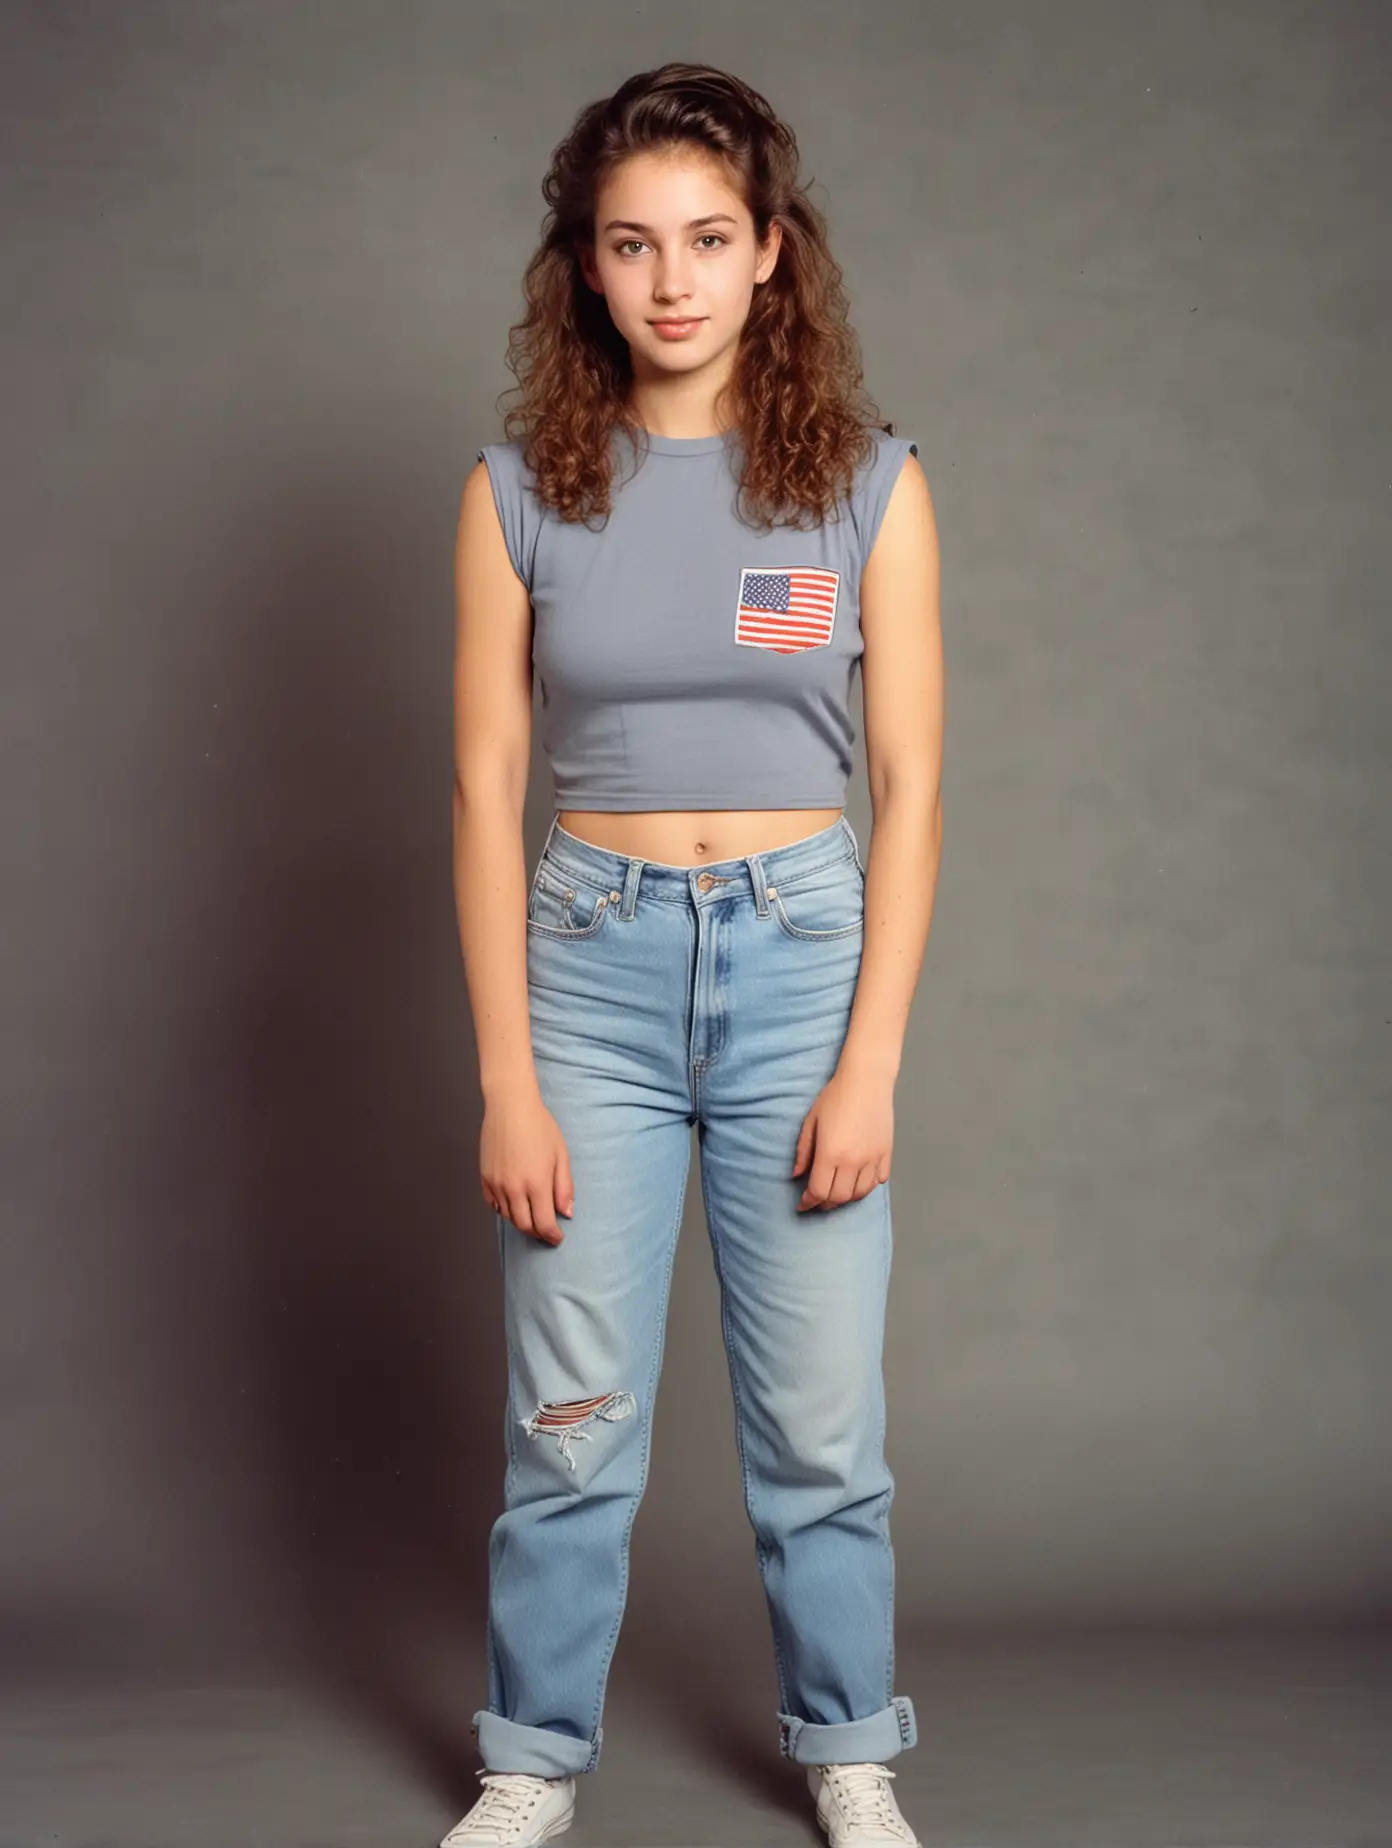 Vintage American Girl Portrait from the 80s and 90s